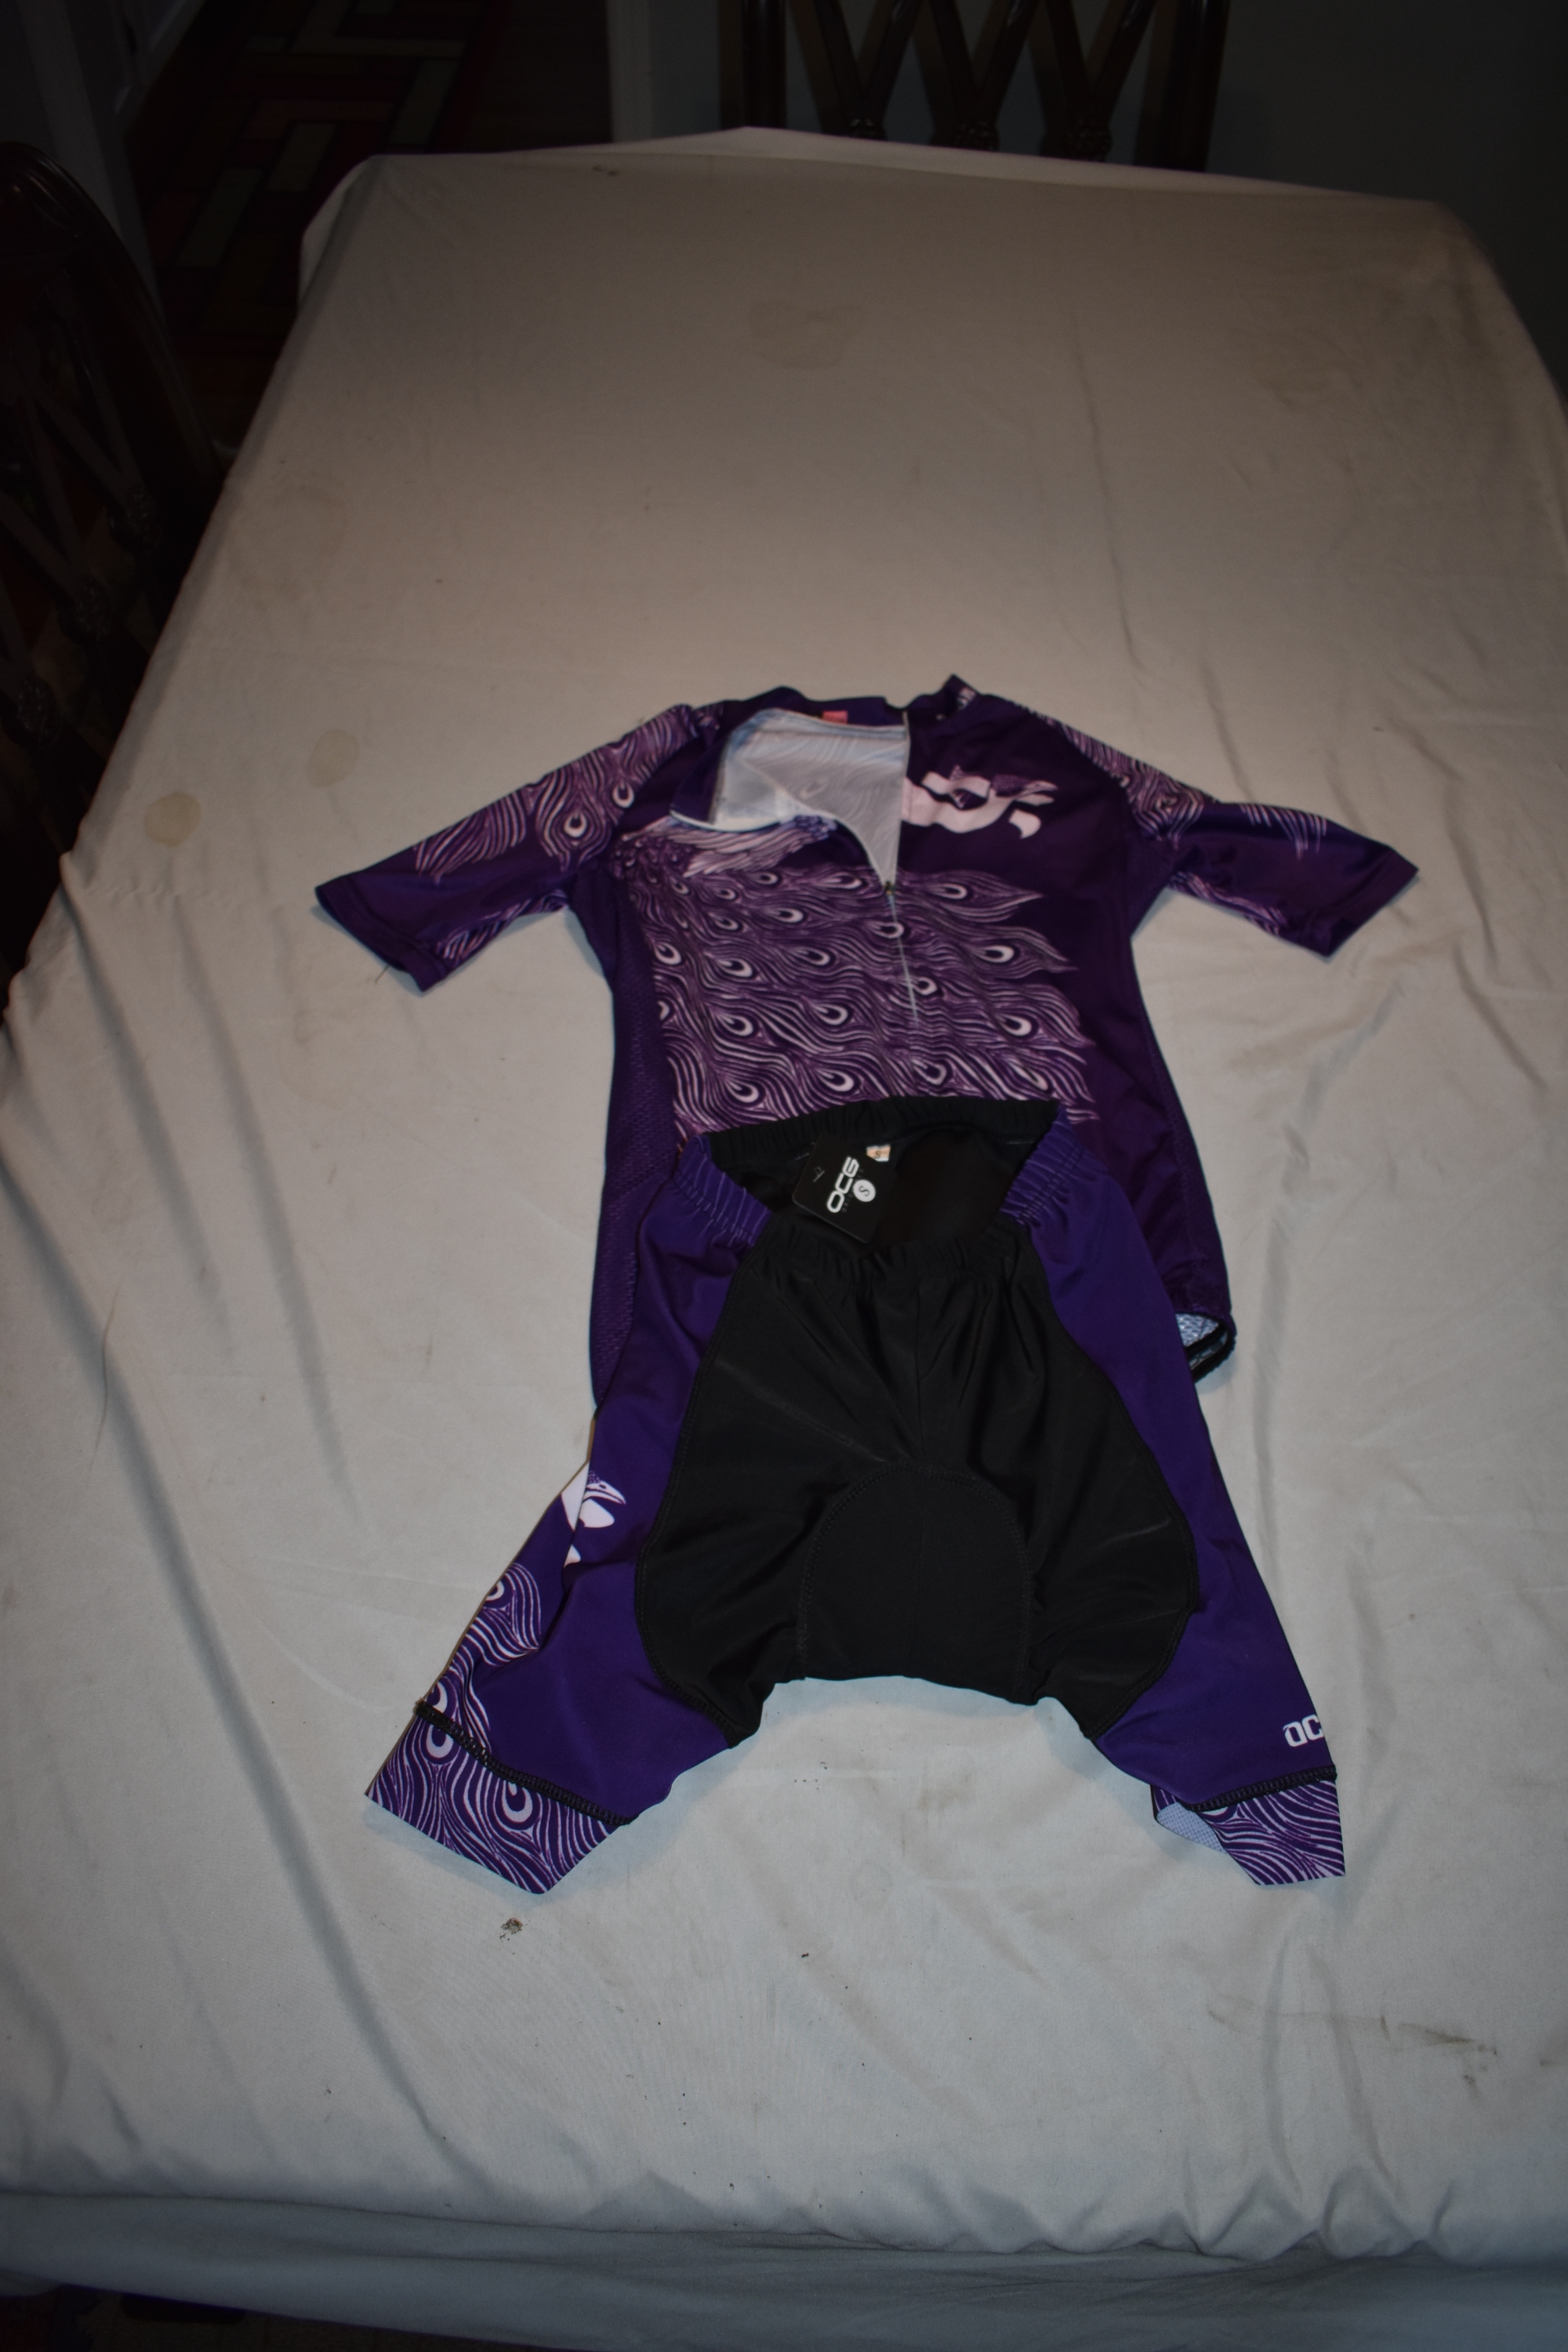 NEW - Online Cycle Gear OCG Compression Cycle Wear, Purple/Black, Small